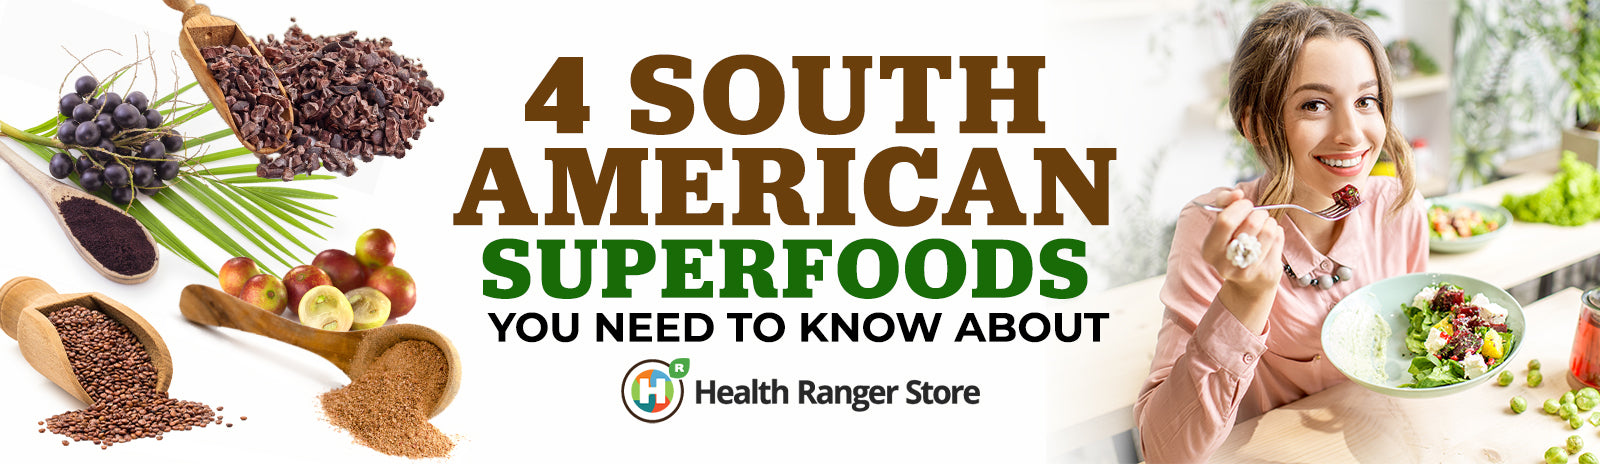 4 South American superfoods you need to know about